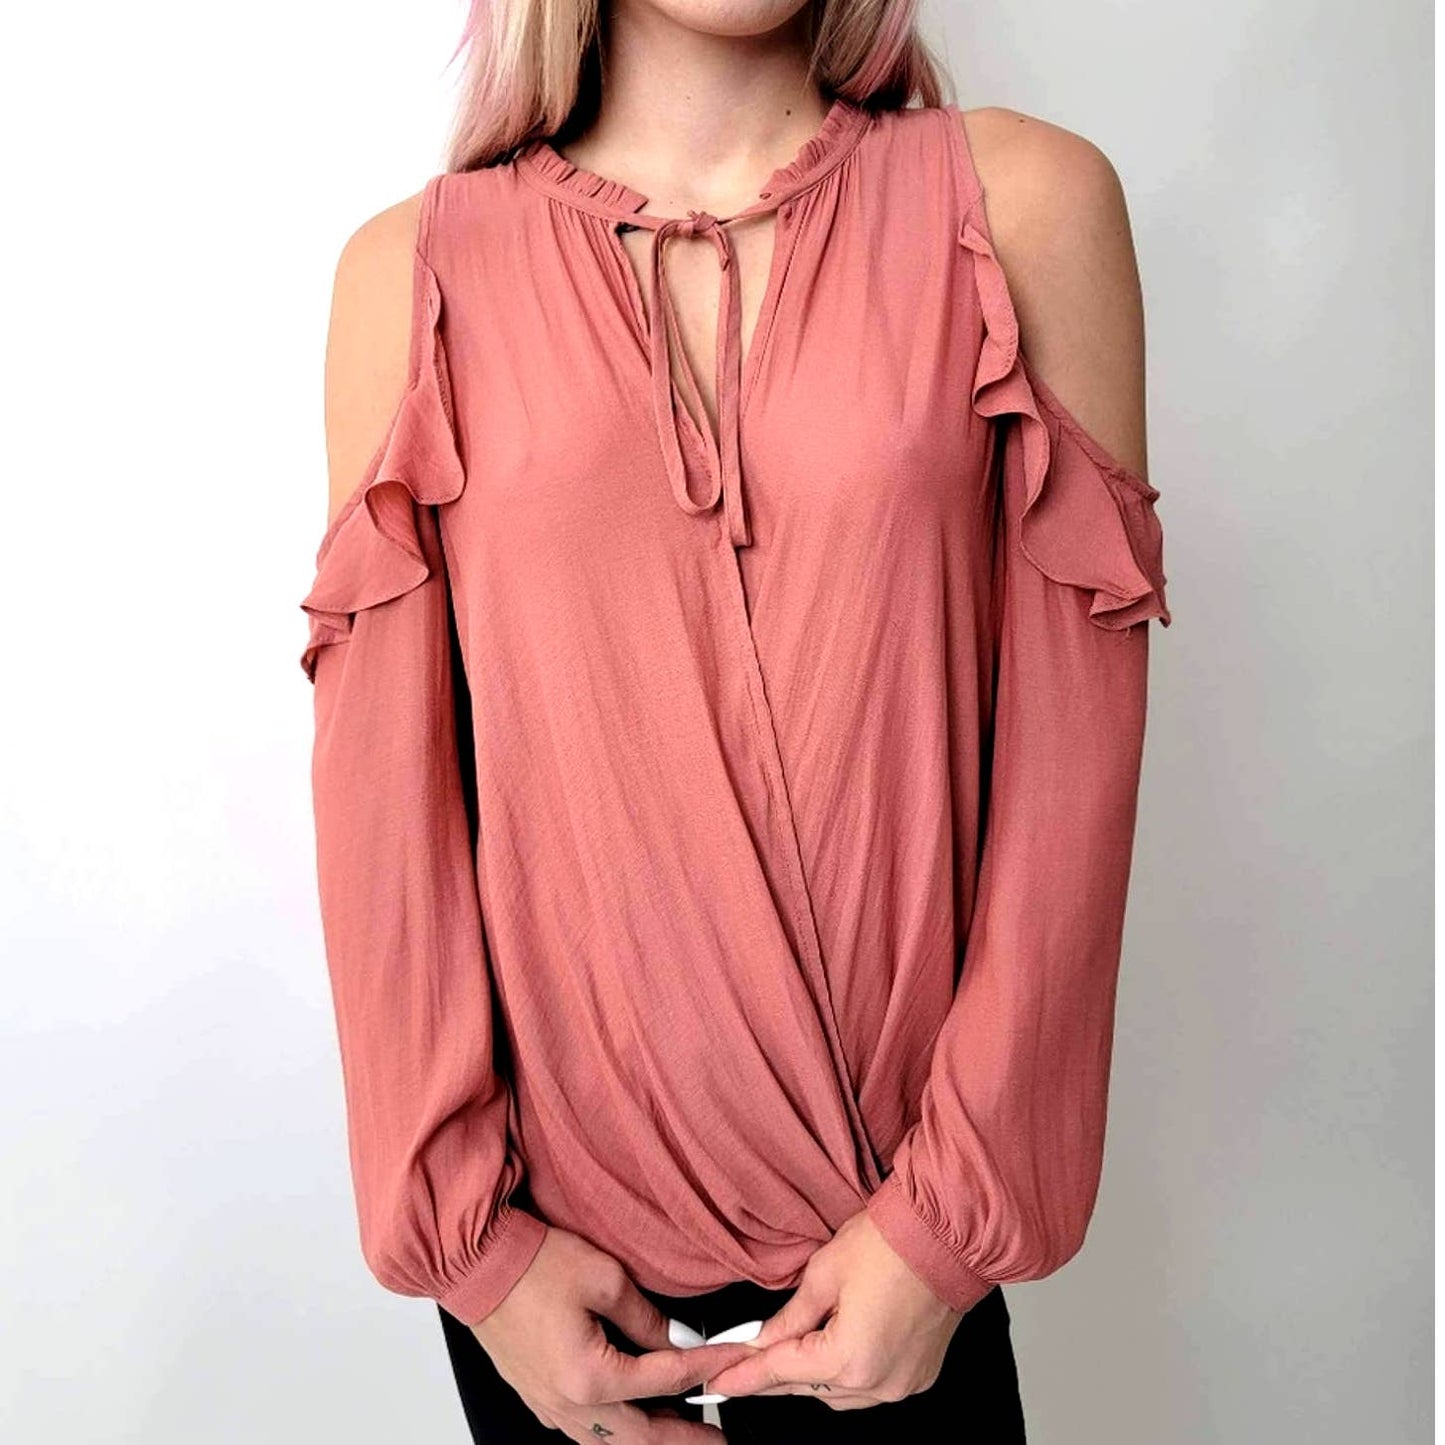 Anthropology Maeve Liesel Salmon Blush Pink Cold Shoulder Top - S